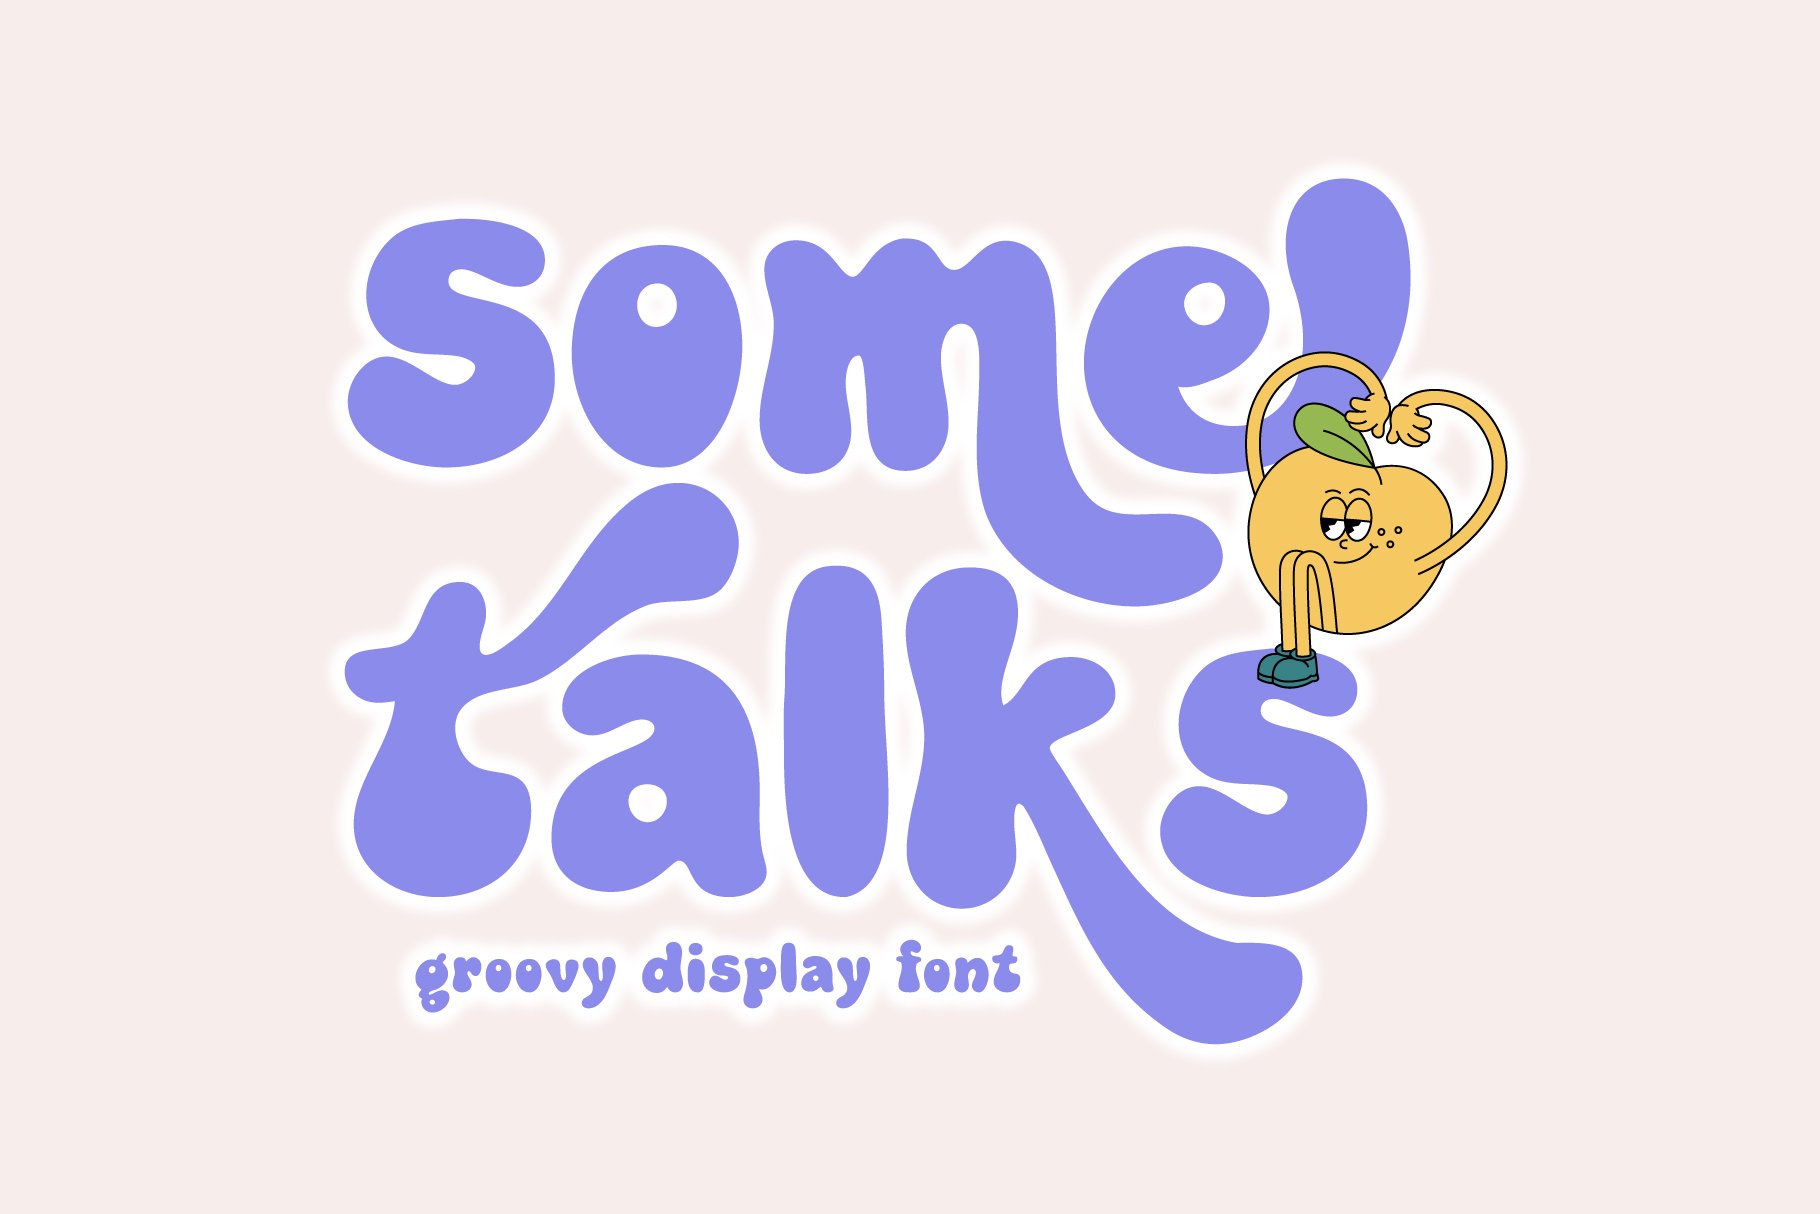 Some Talks - Groovy Display Font cover image.